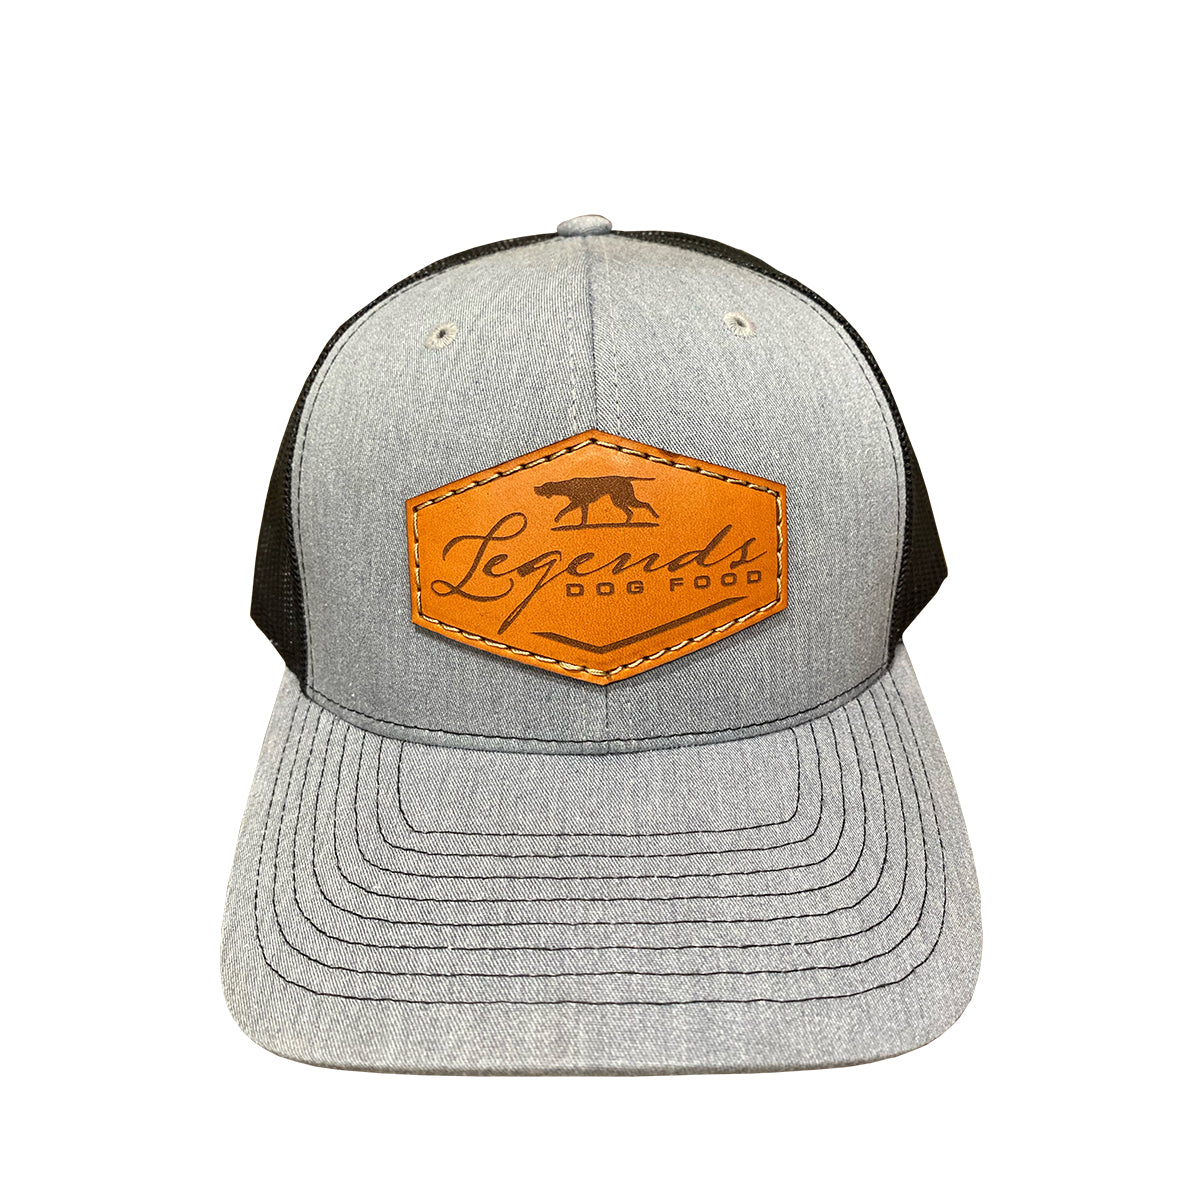 Grey/Black Leather Patch Hat